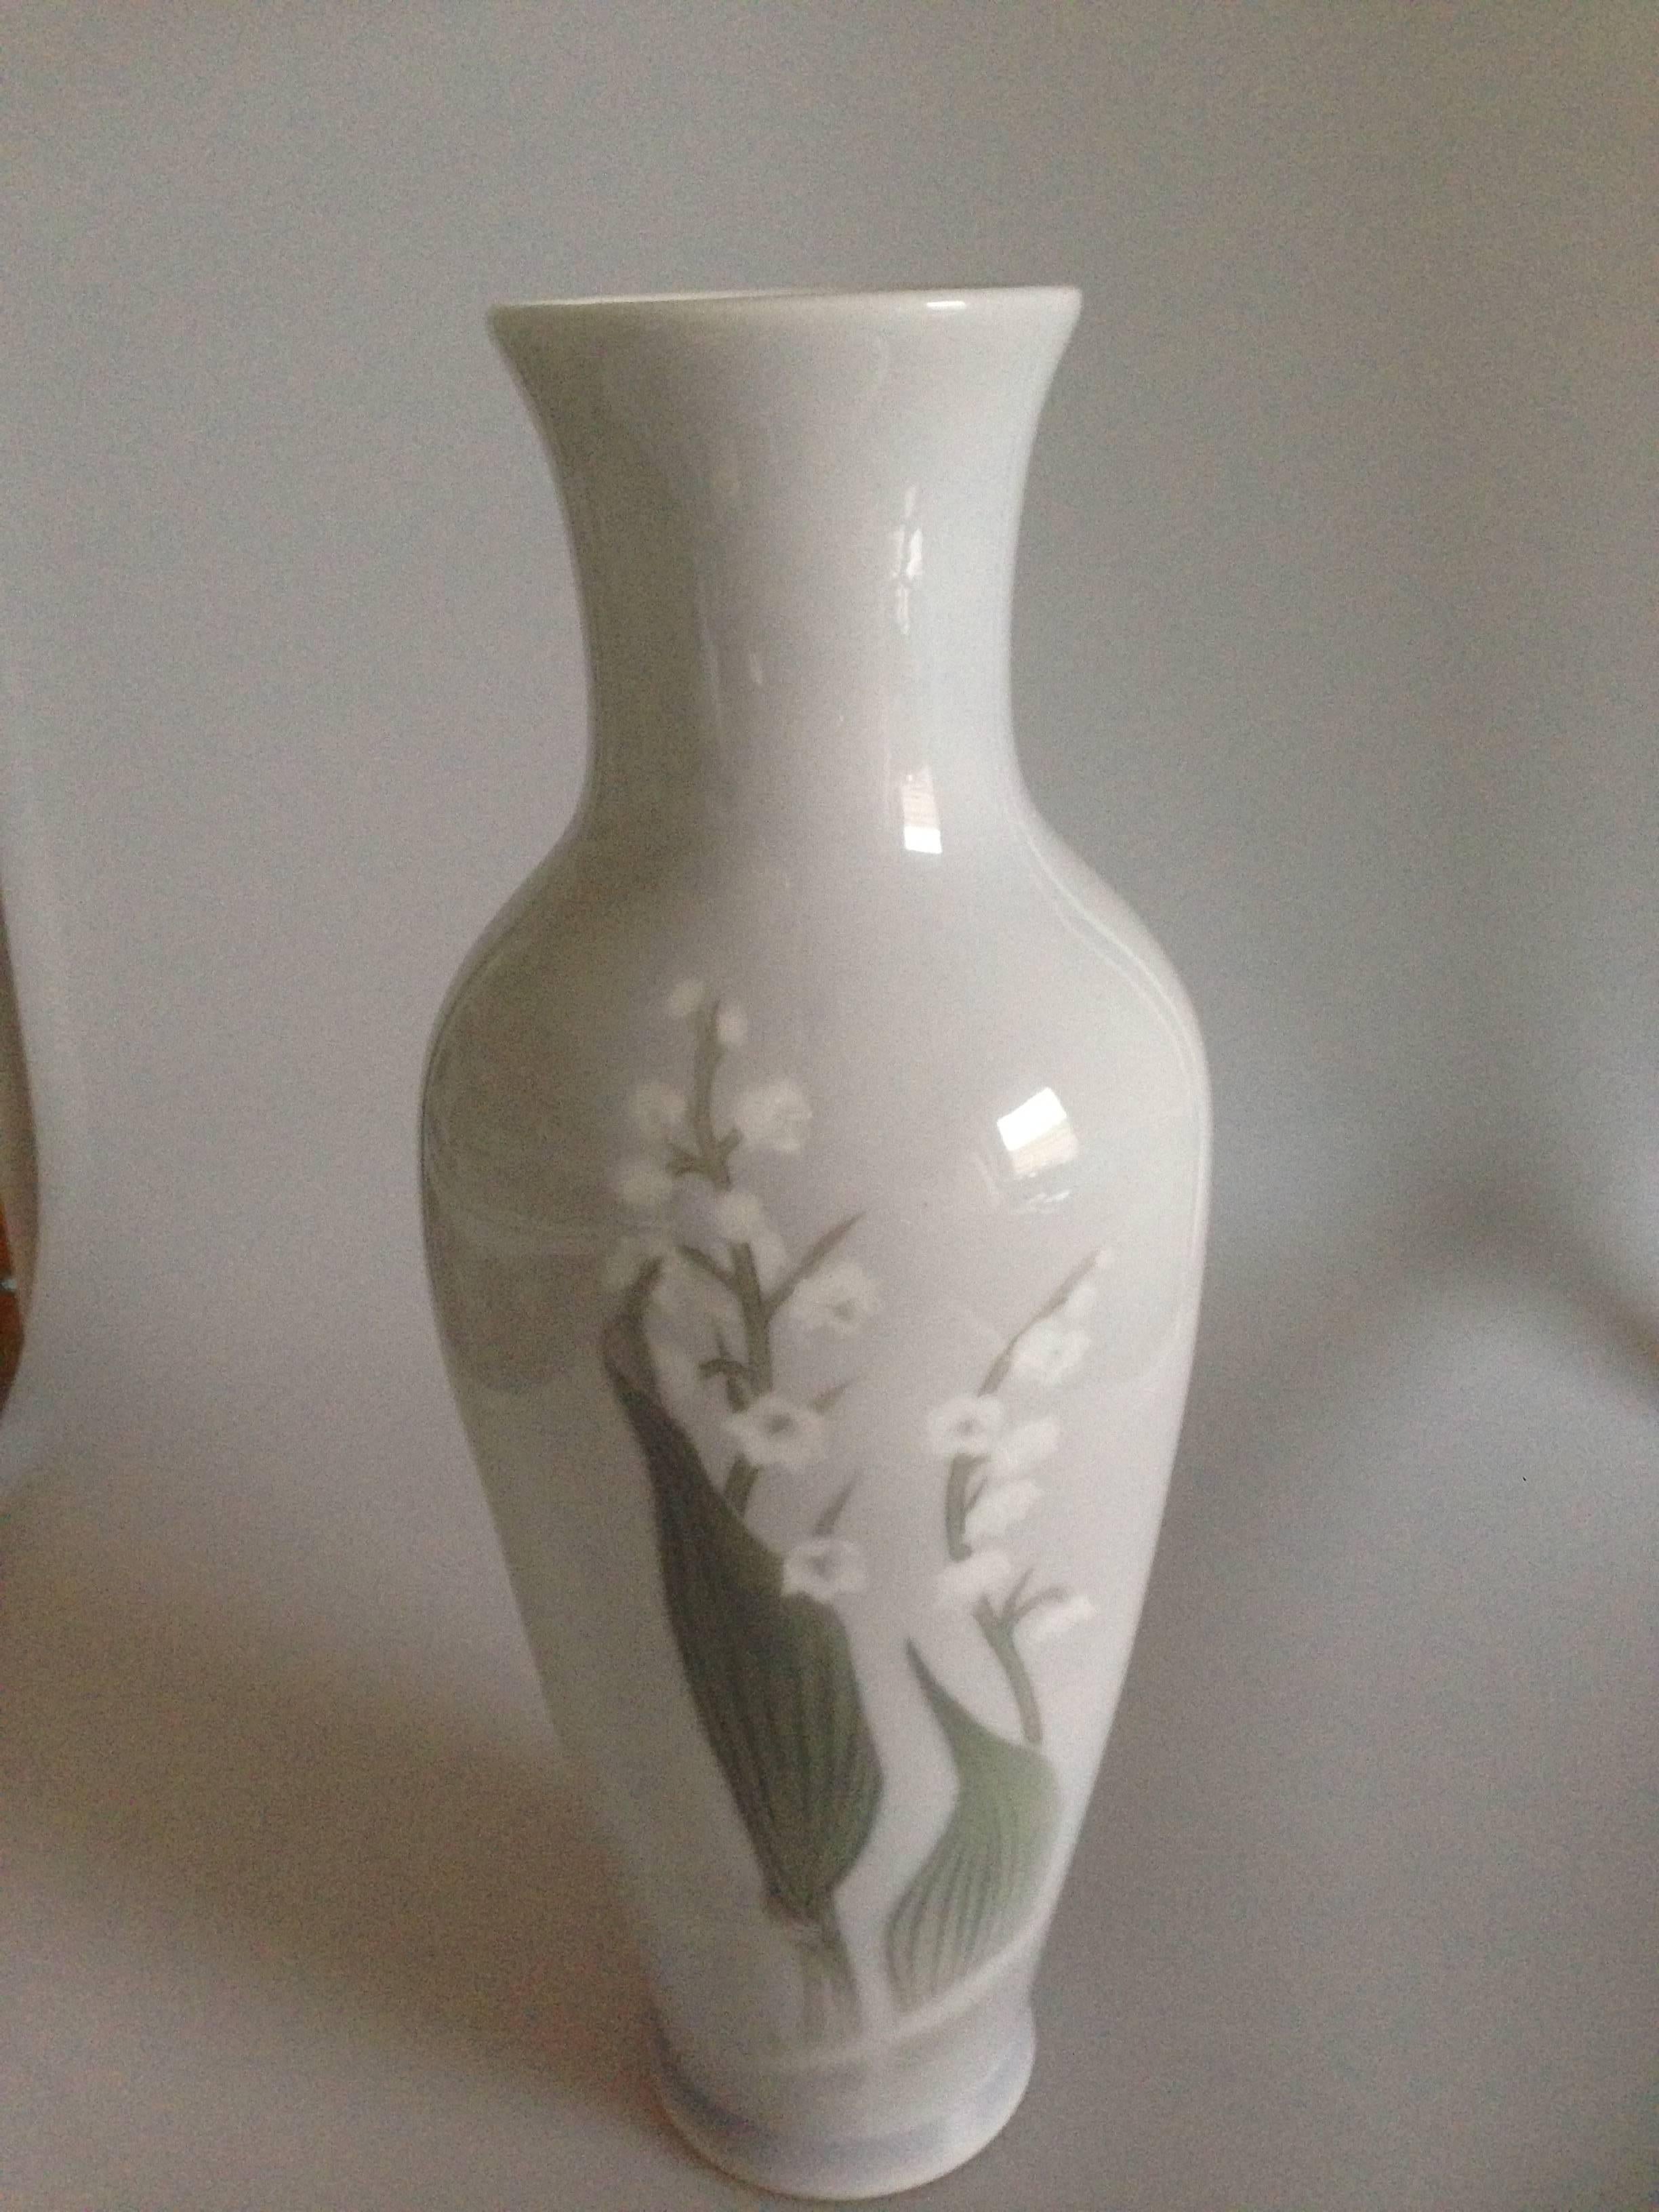 Royal Copenhagen unique Art Nouveau Vase by Marianne Host from 1896. Measures 42cm high and 11cm diameter at the top rim and is in perfect condition.